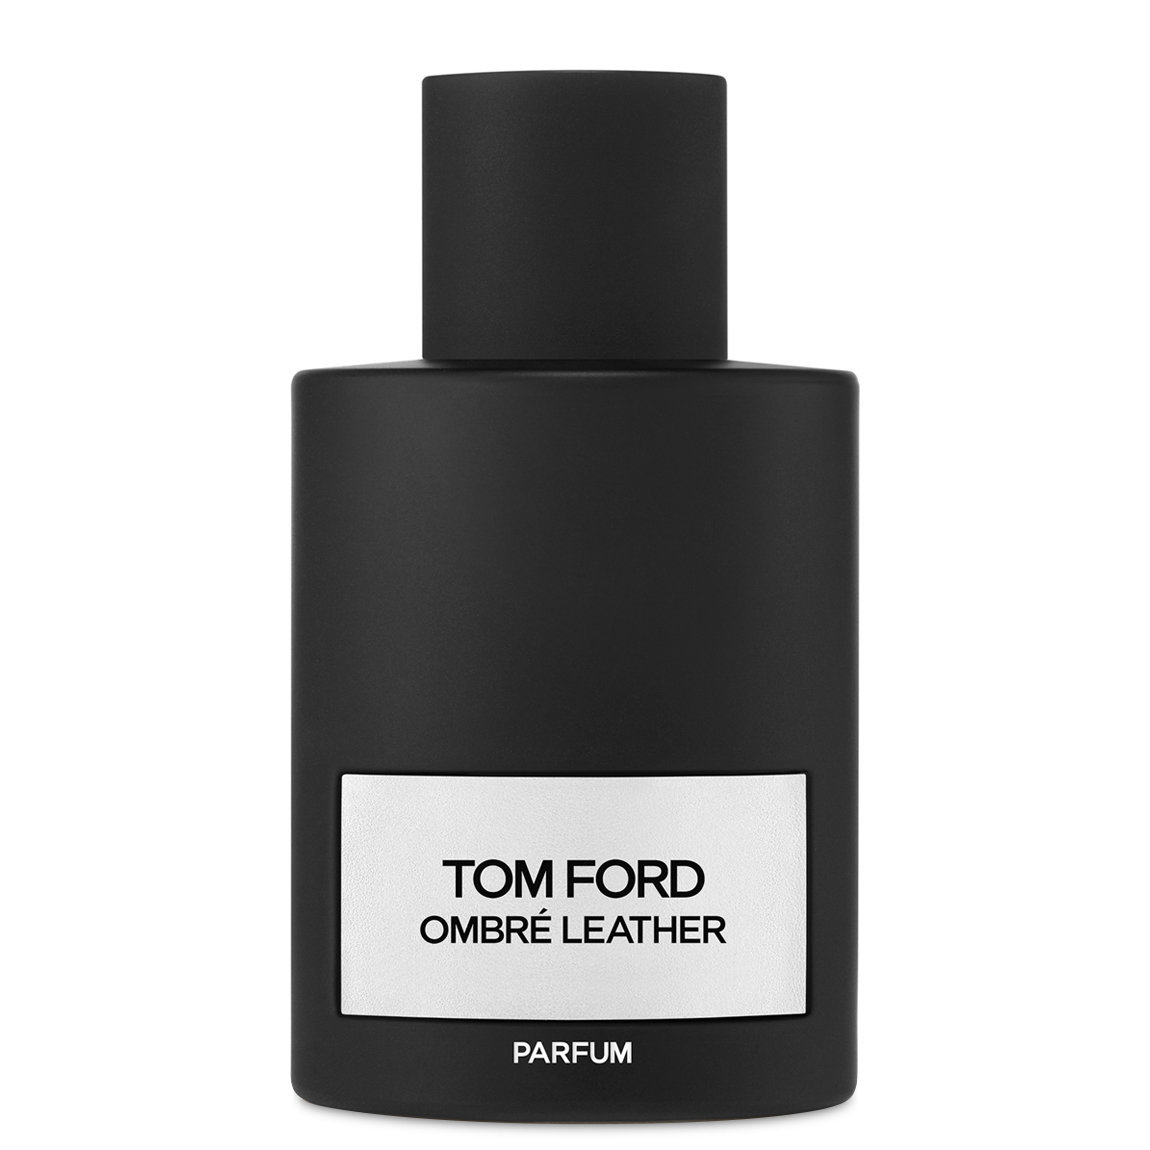 TOM FORD Ombré Leather Parfum 100 ml alternative view 1 - product swatch.